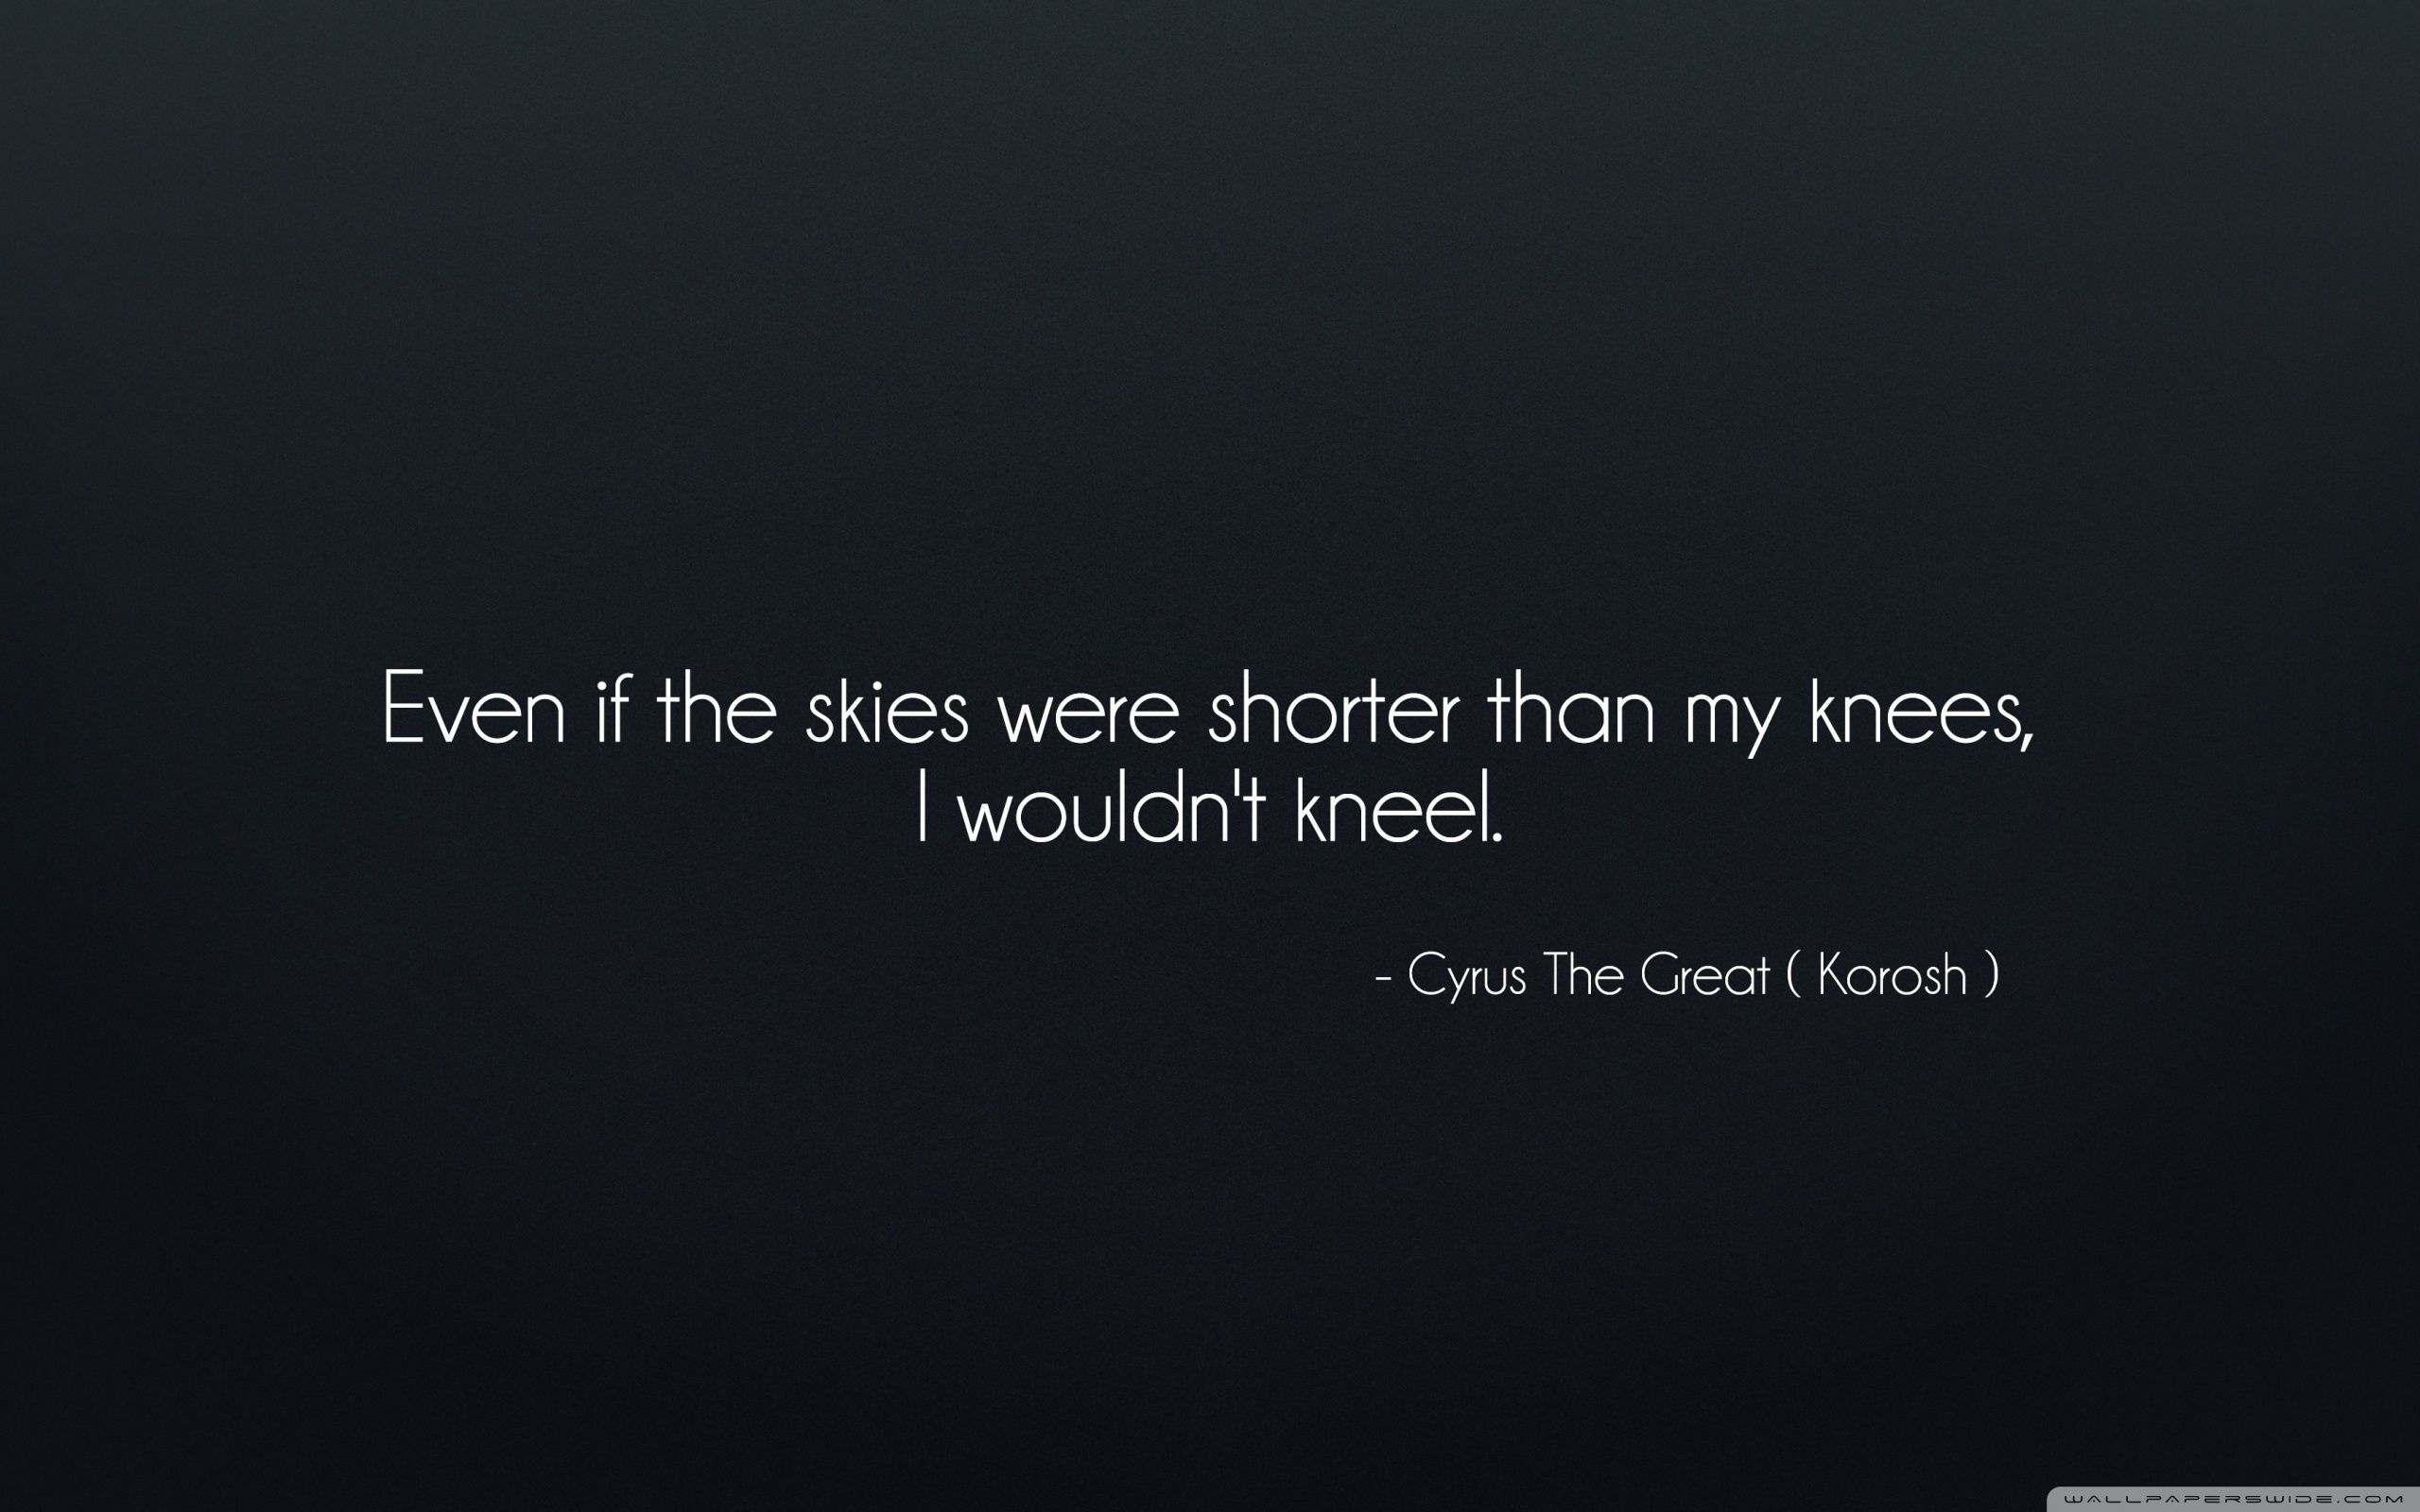 Even if the skies were shorter than my knees, I wouldnt kneel